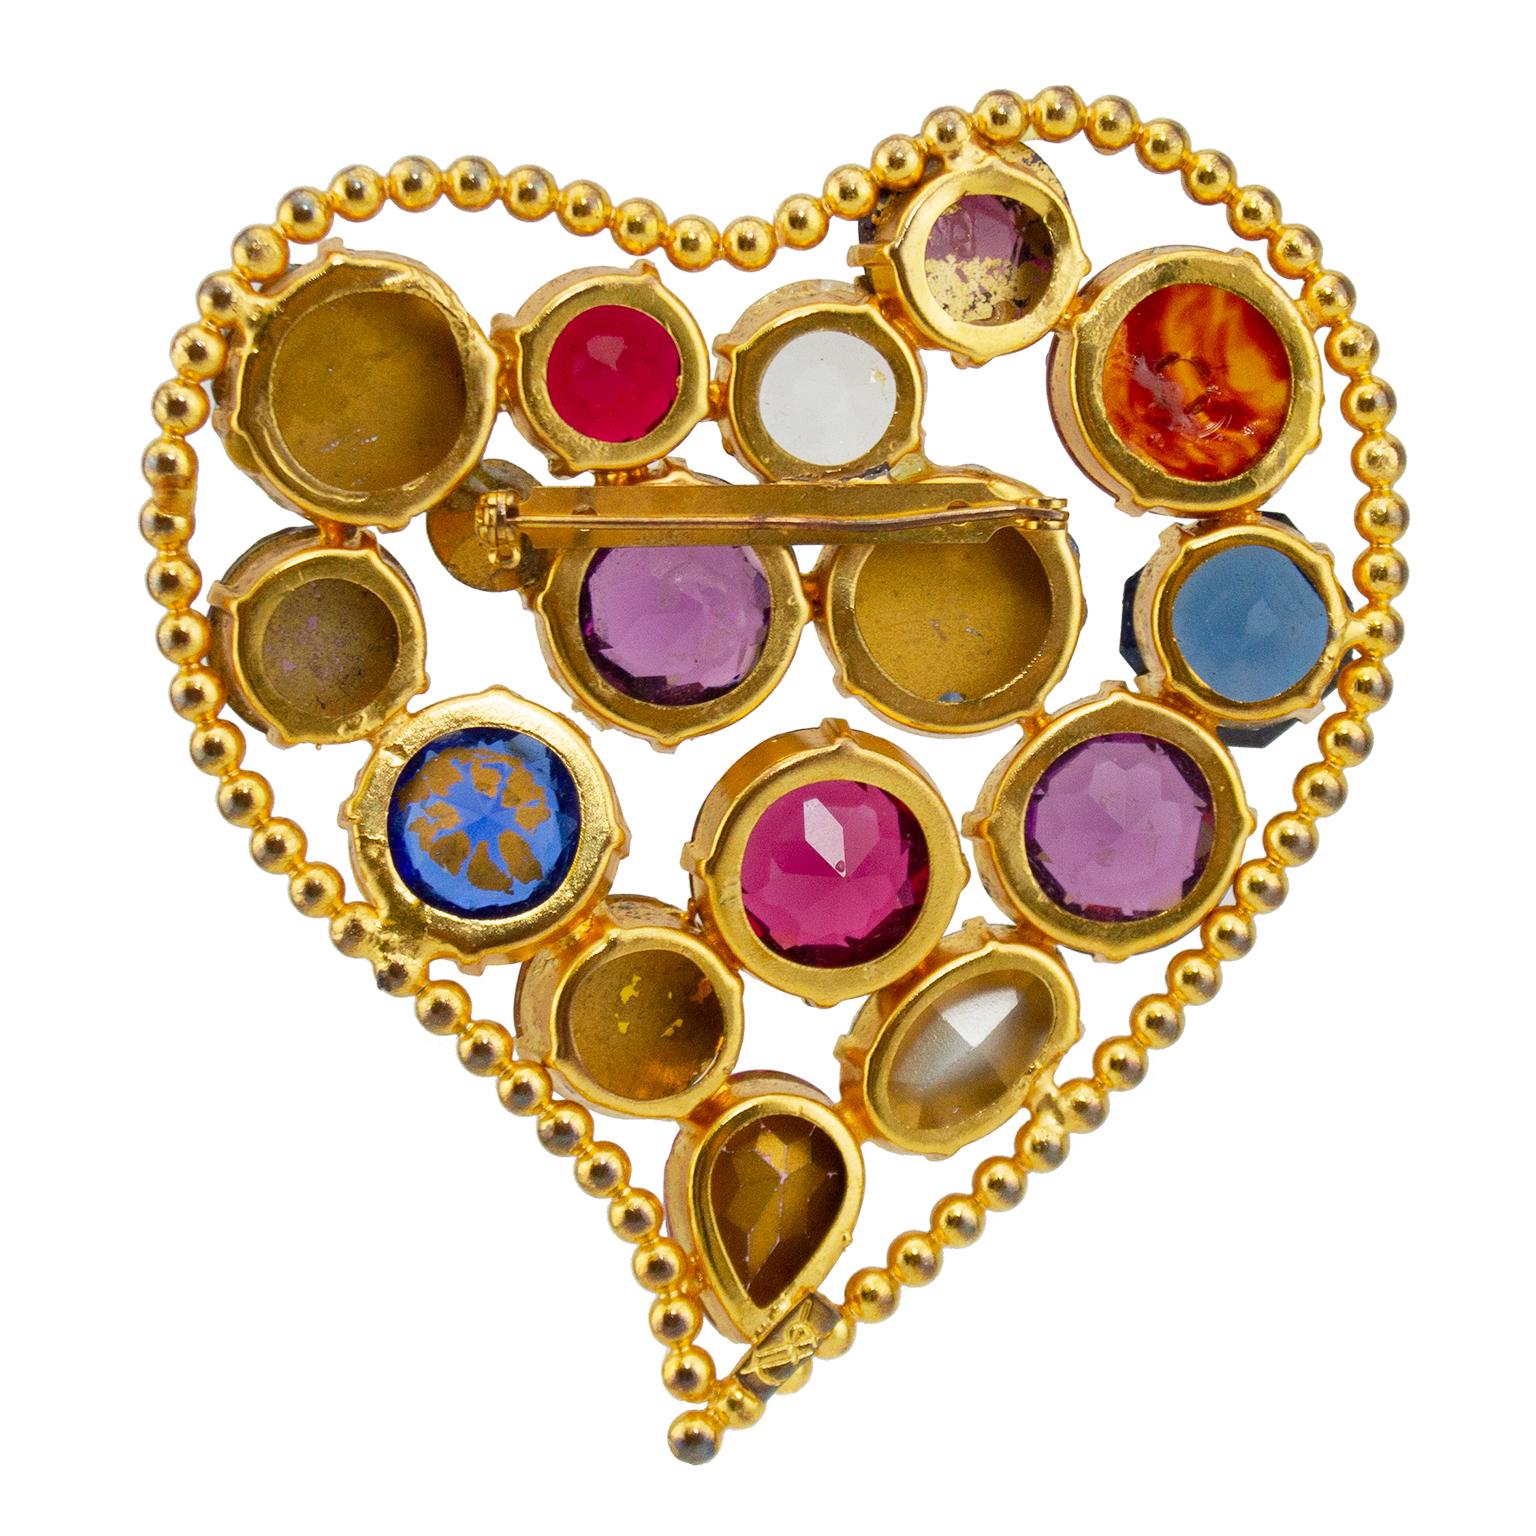 Stunning, vibrant, oversized and powerful Yves Saint Laurent brooch from the 1980s. Heart shaped gilt metal with 16 different faceted glass stones in a range of colours and textures. YSL marking on back. Very good vintage condition. Some small signs